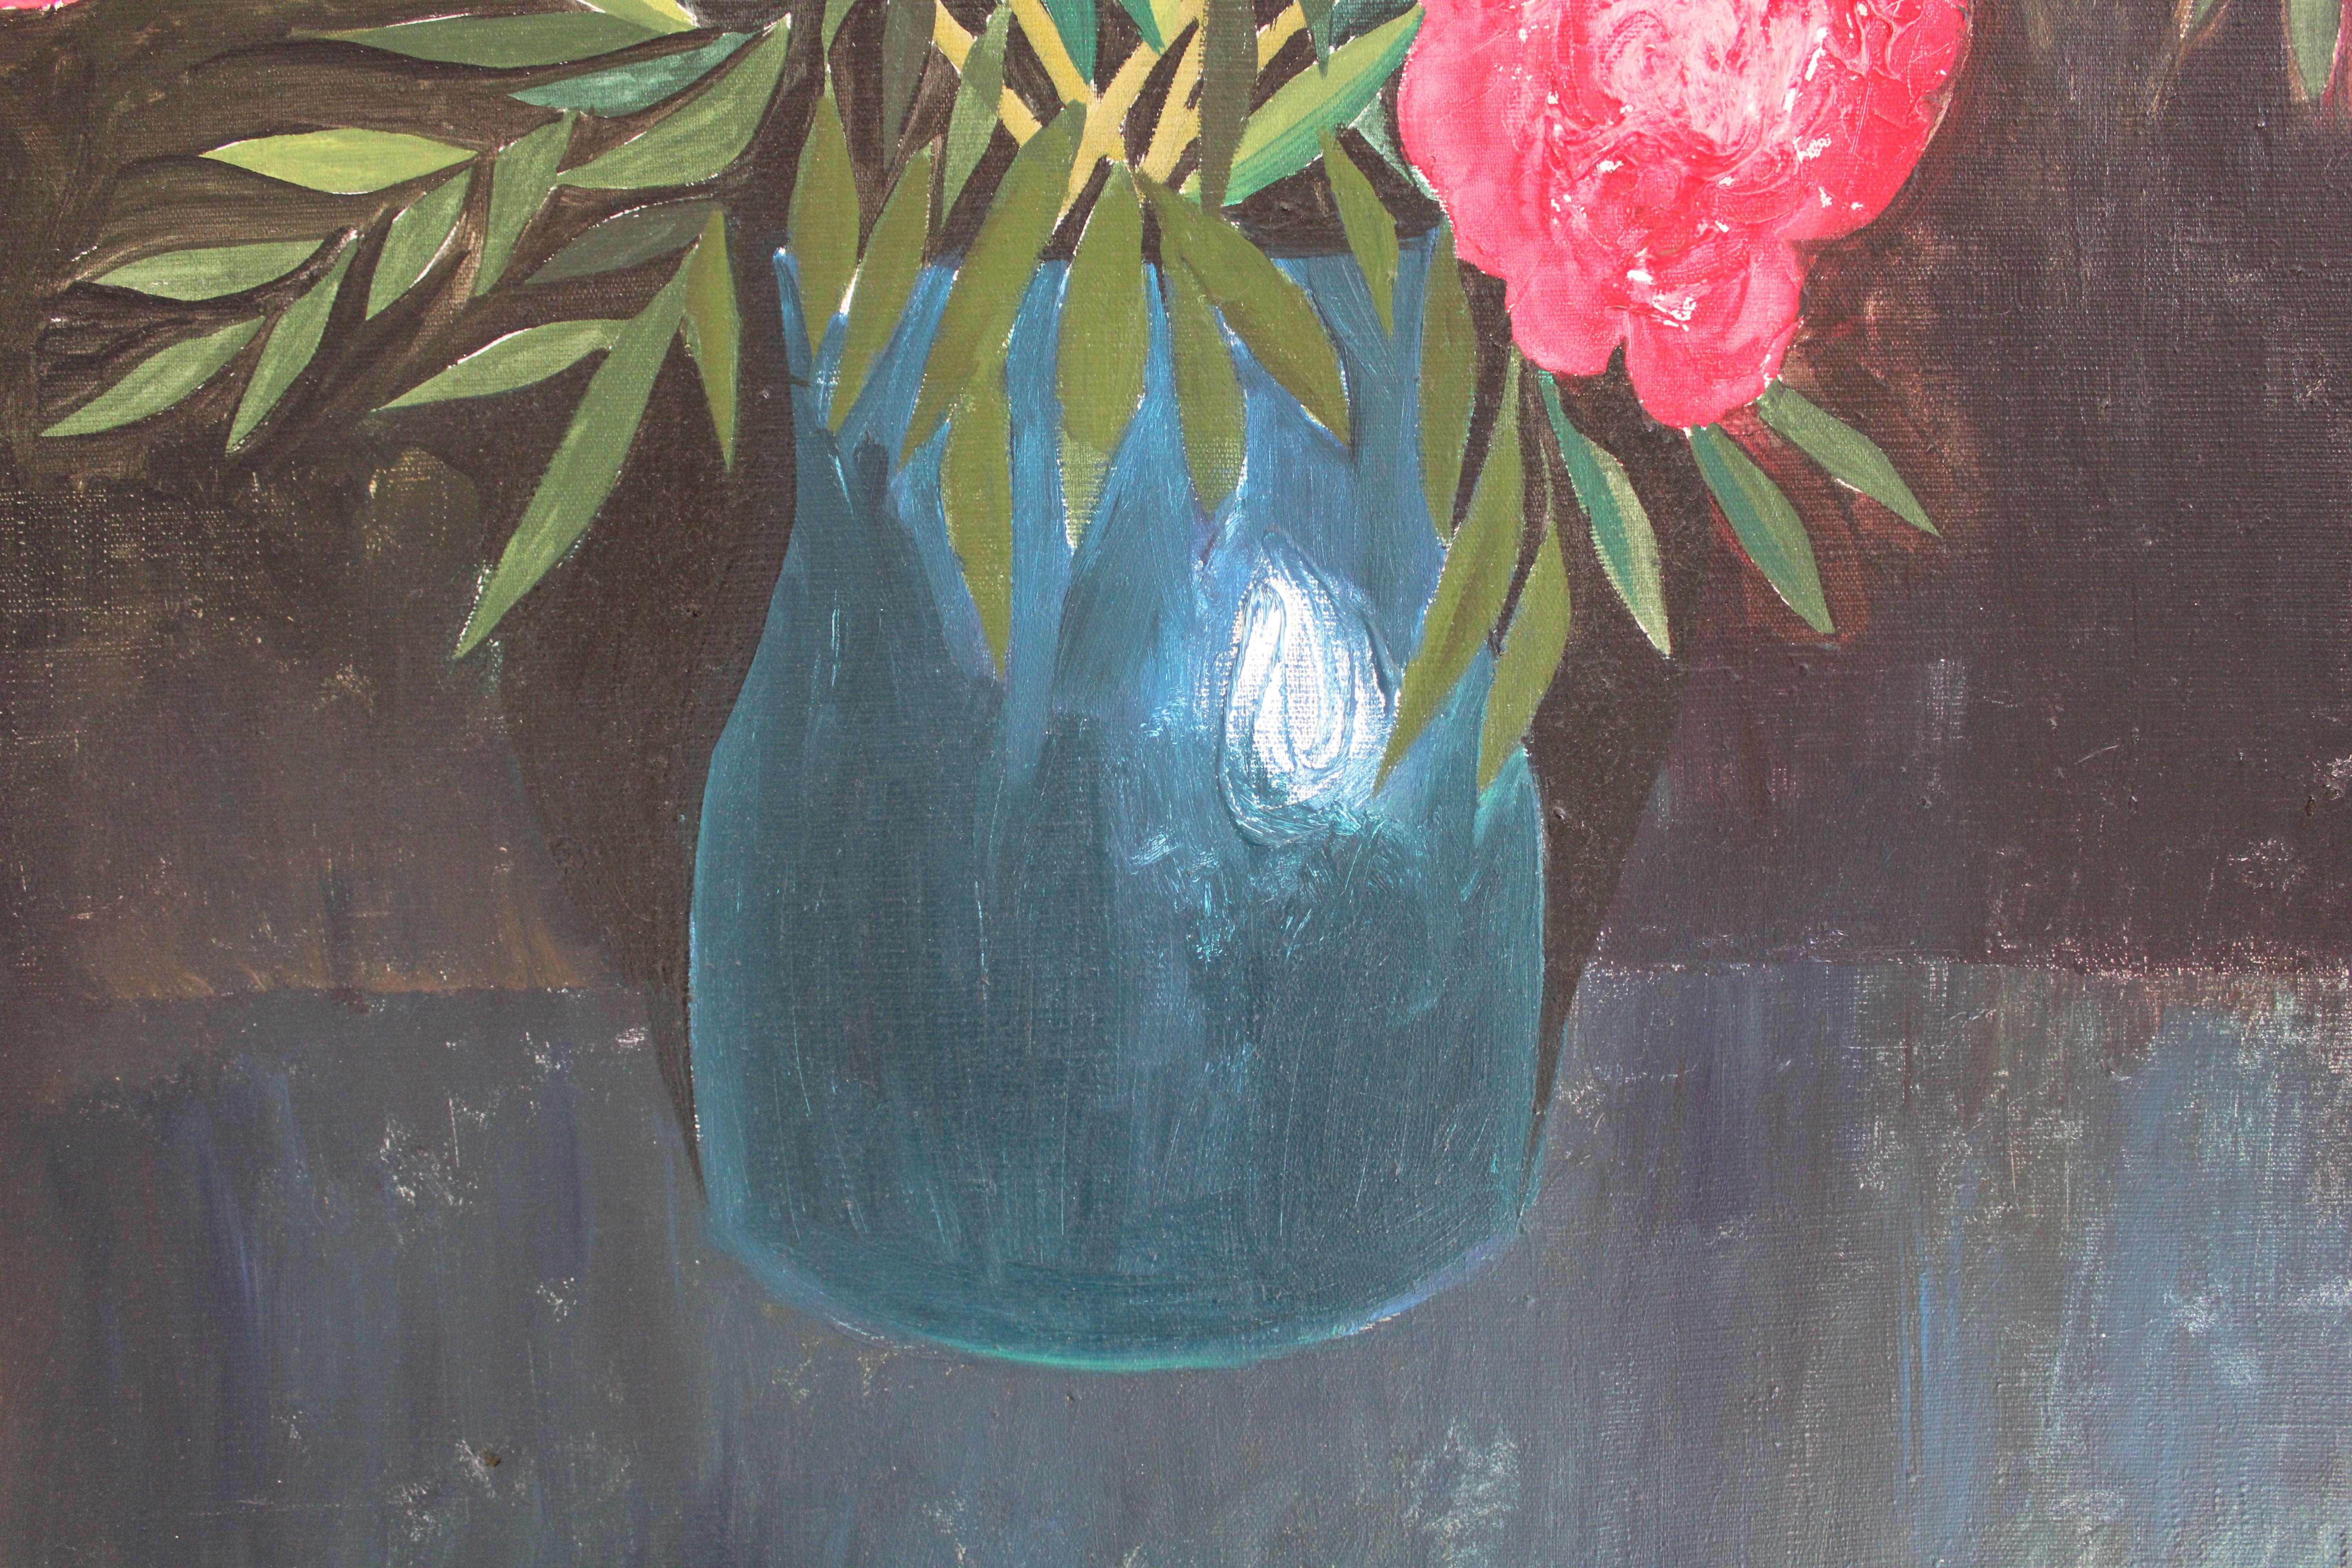 Peonies

1975. Oil on canvas, 100x92 cm

The combination of the pink flowers and the blue vase creates a harmonious color scheme, evoking a sense of tranquility and elegance.

The painting is set against a dark background, which serves to enhance